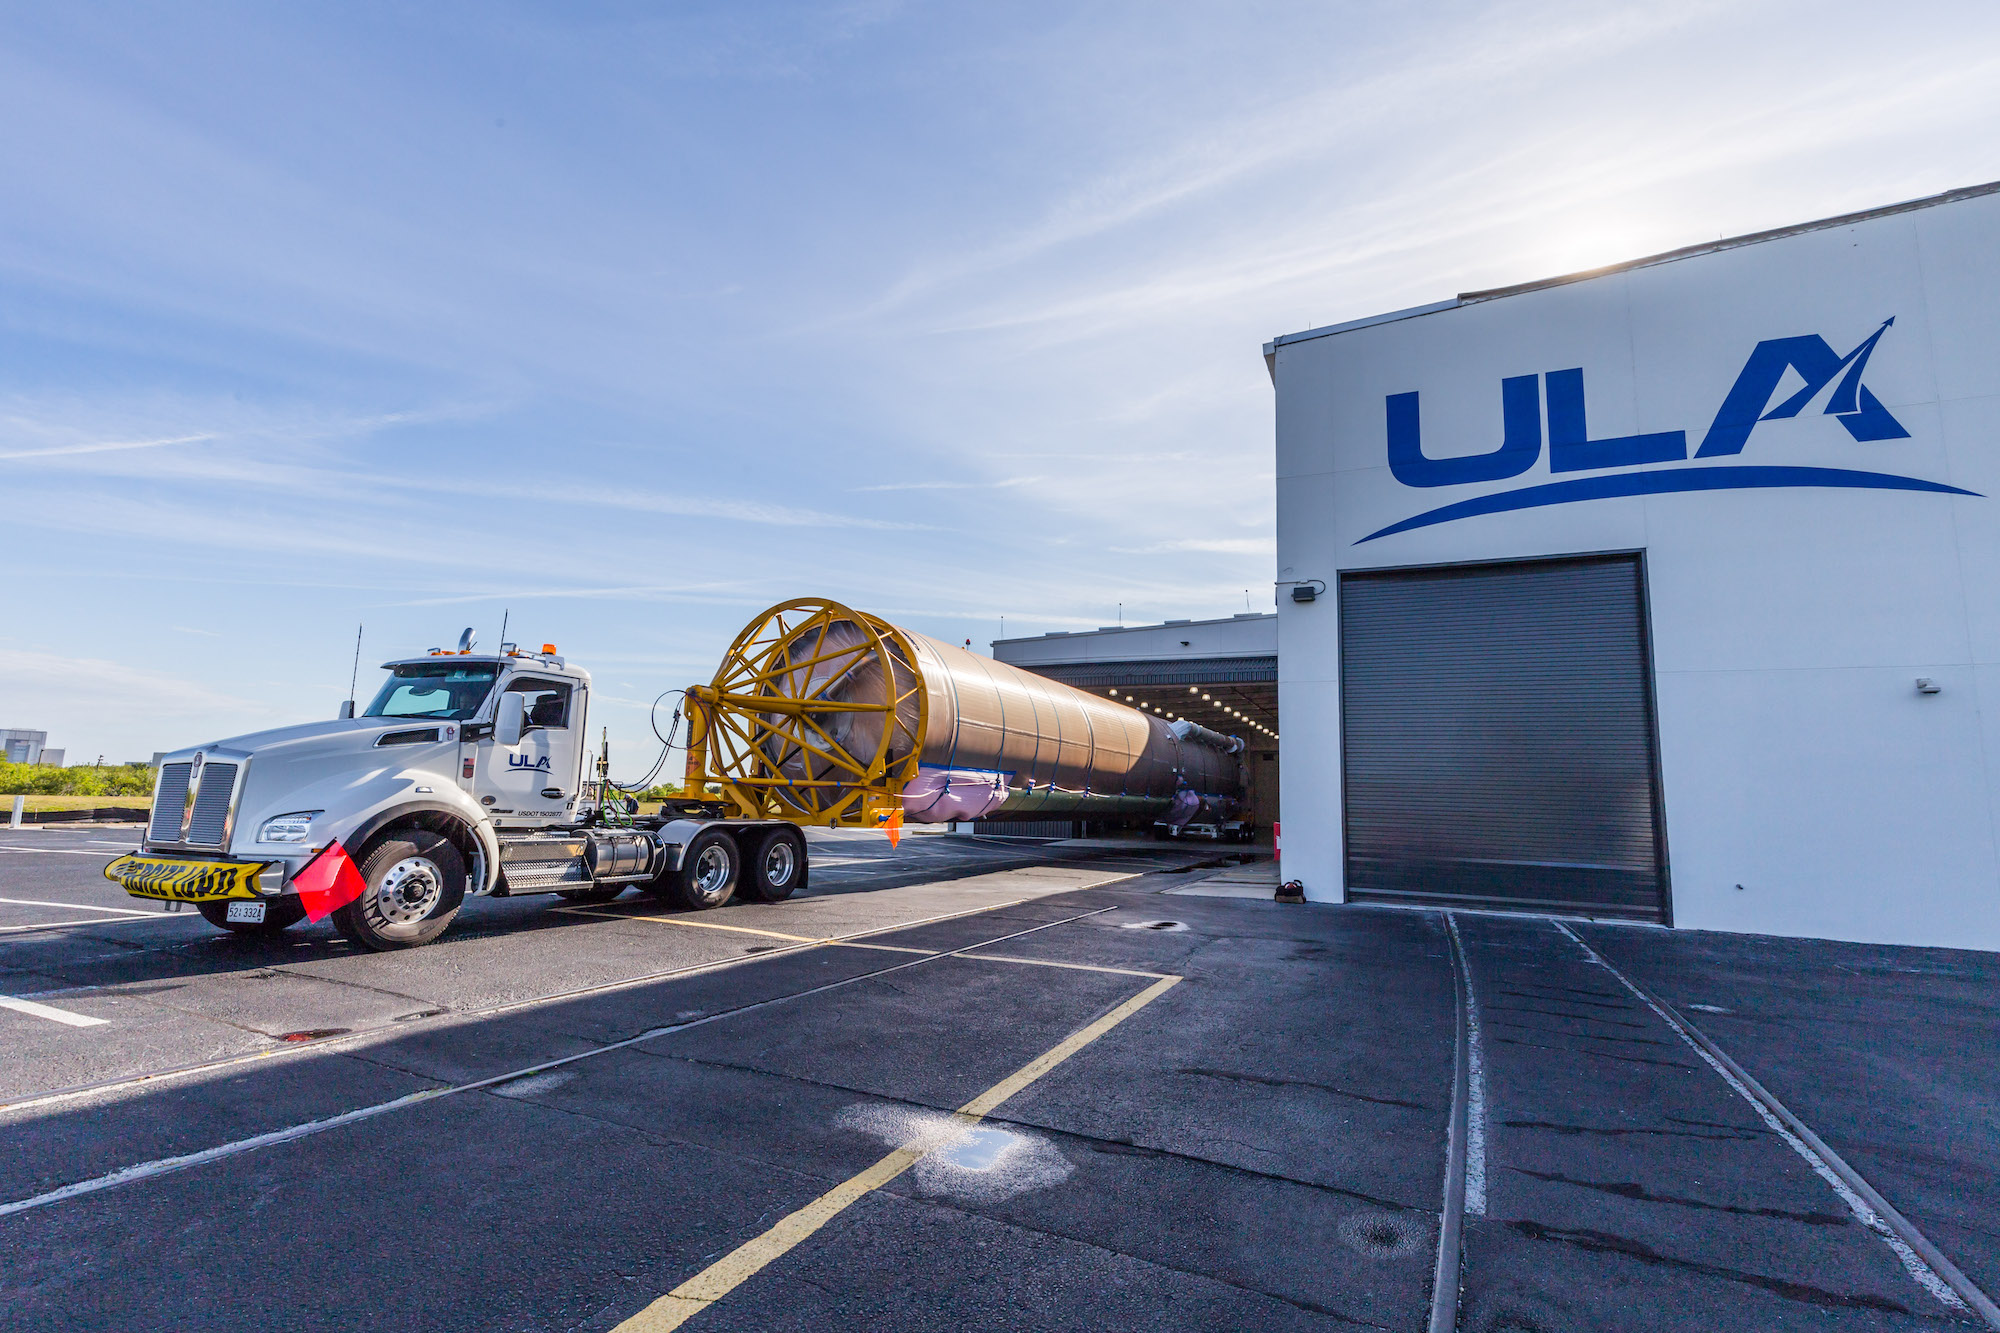 The Atlas stage arrives at the ASOC today. Photo by United Launch Alliance